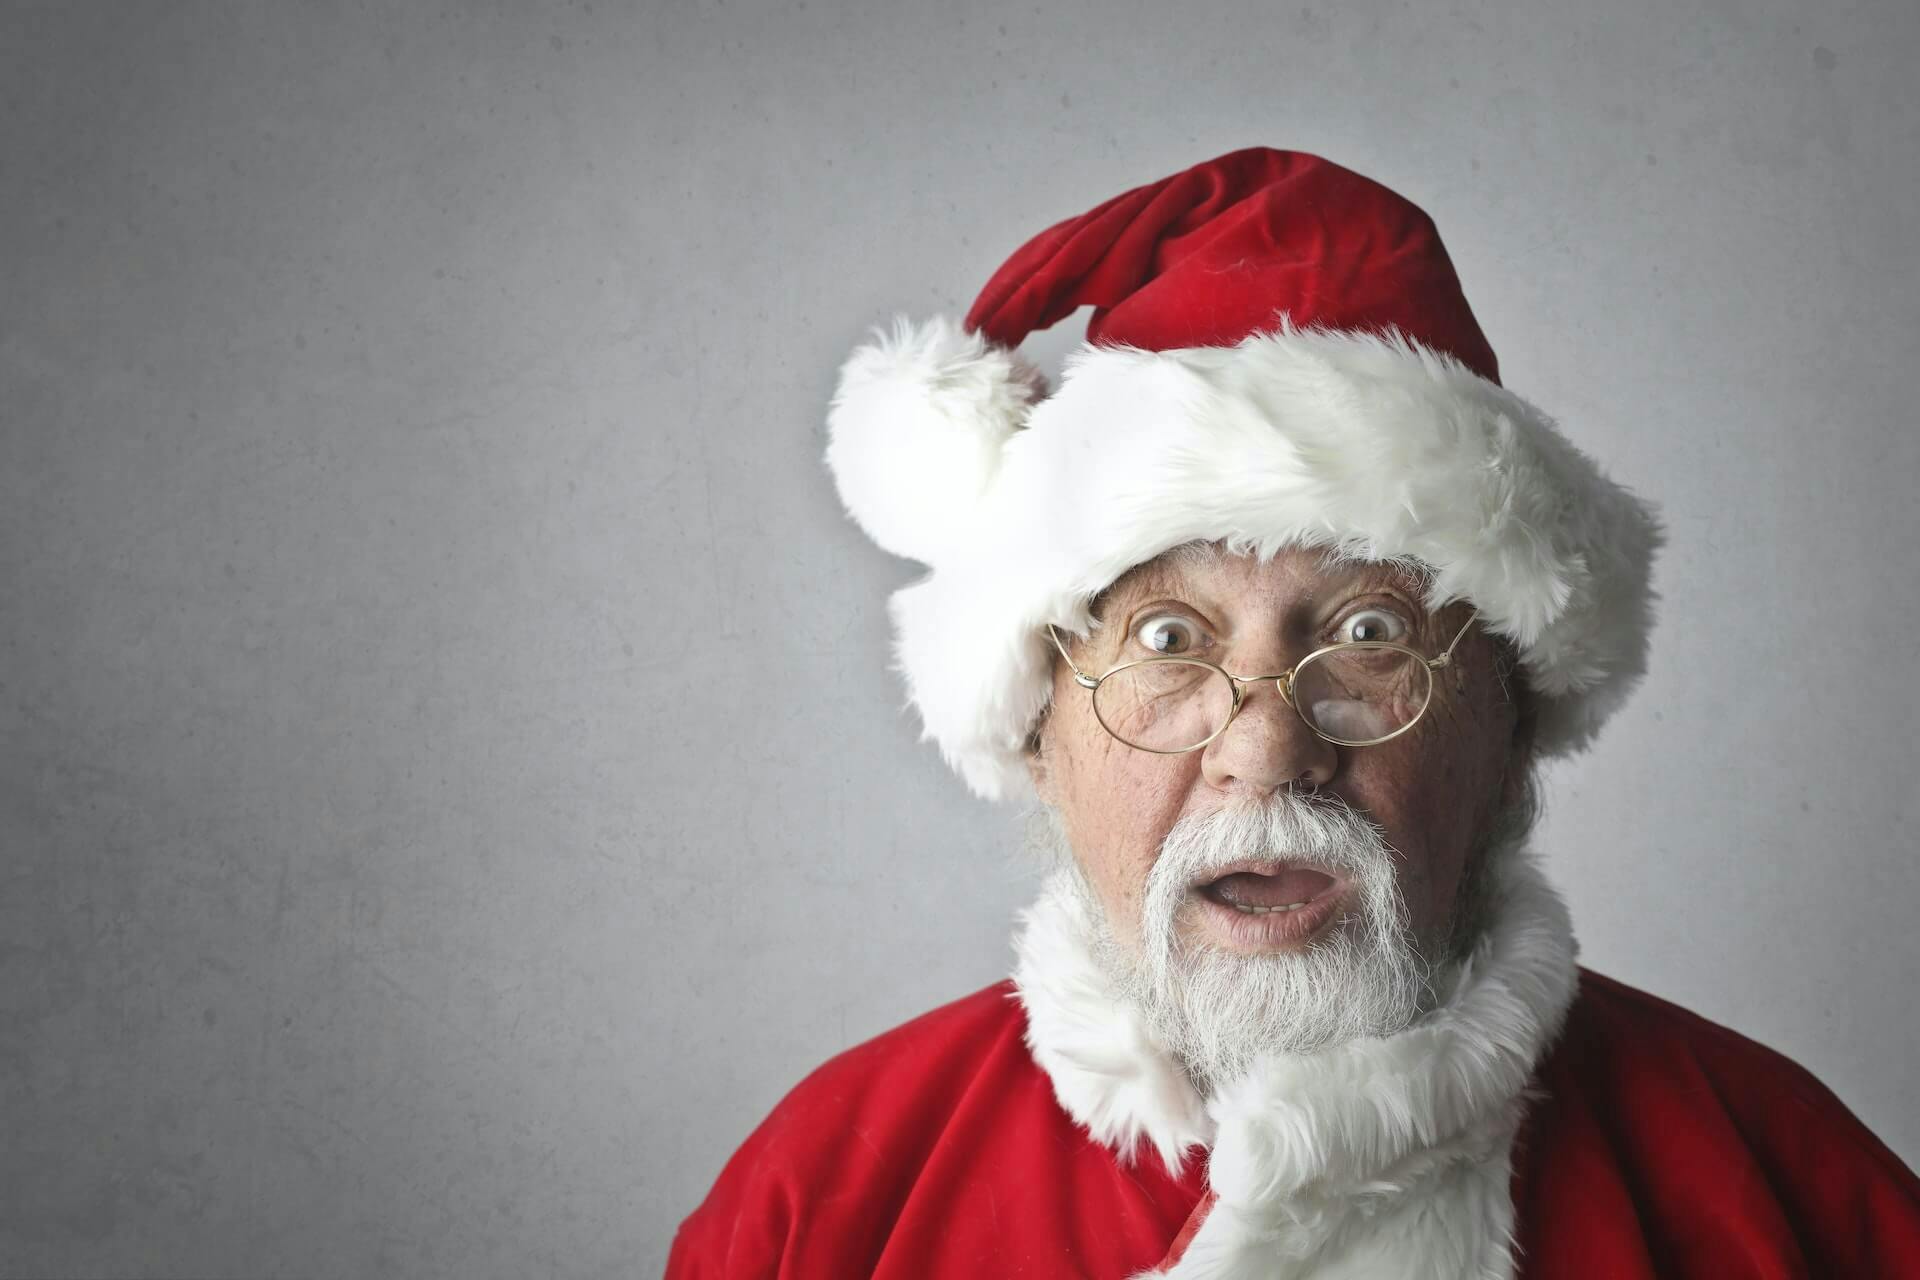 Do French companies no longer believe in Santa Claus?